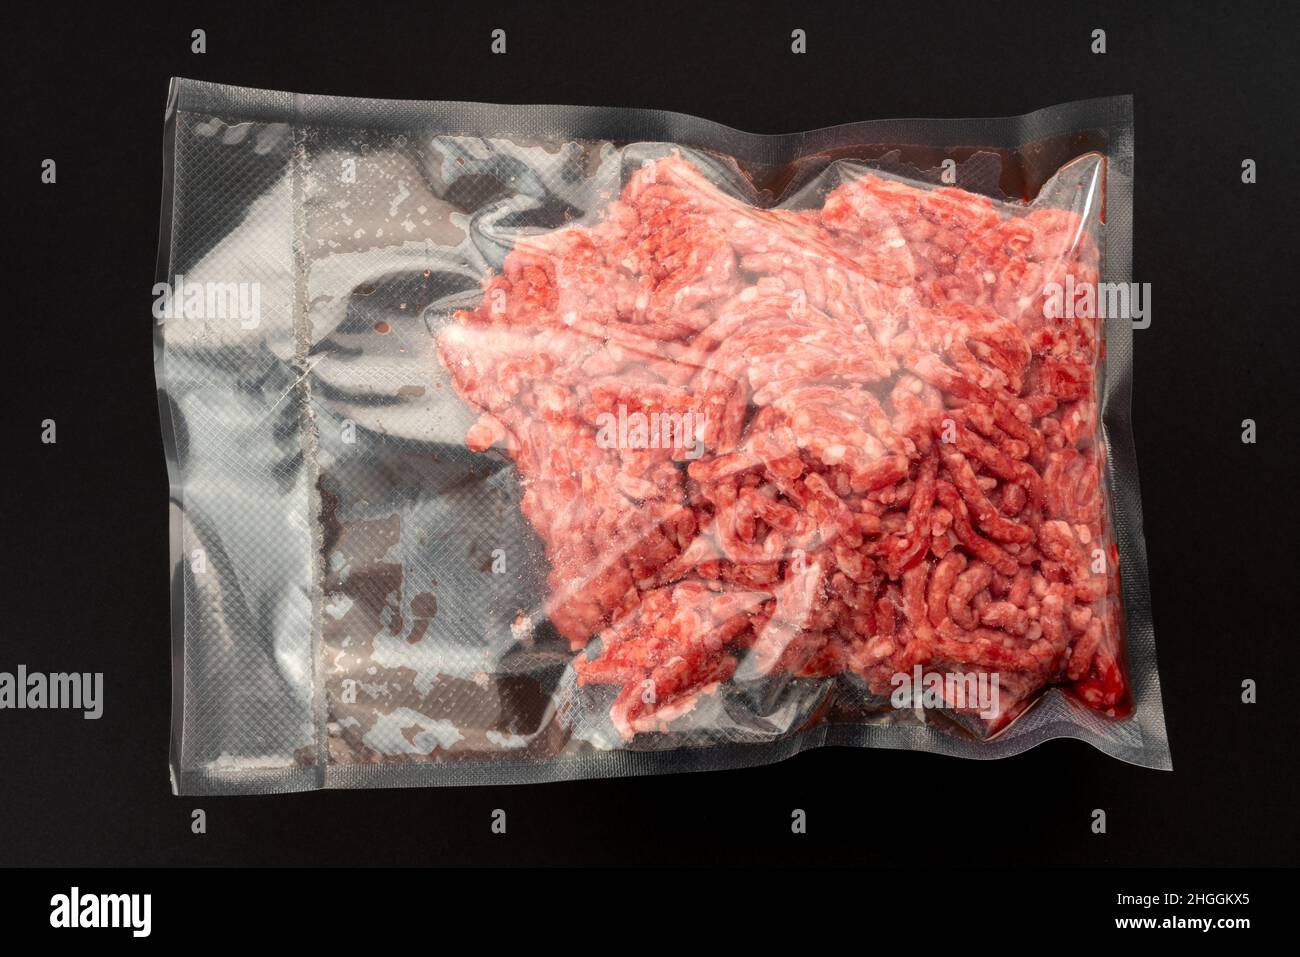 Minced beef in vacuum packed sealed for sous vide cooking on nero background Stock - Alamy